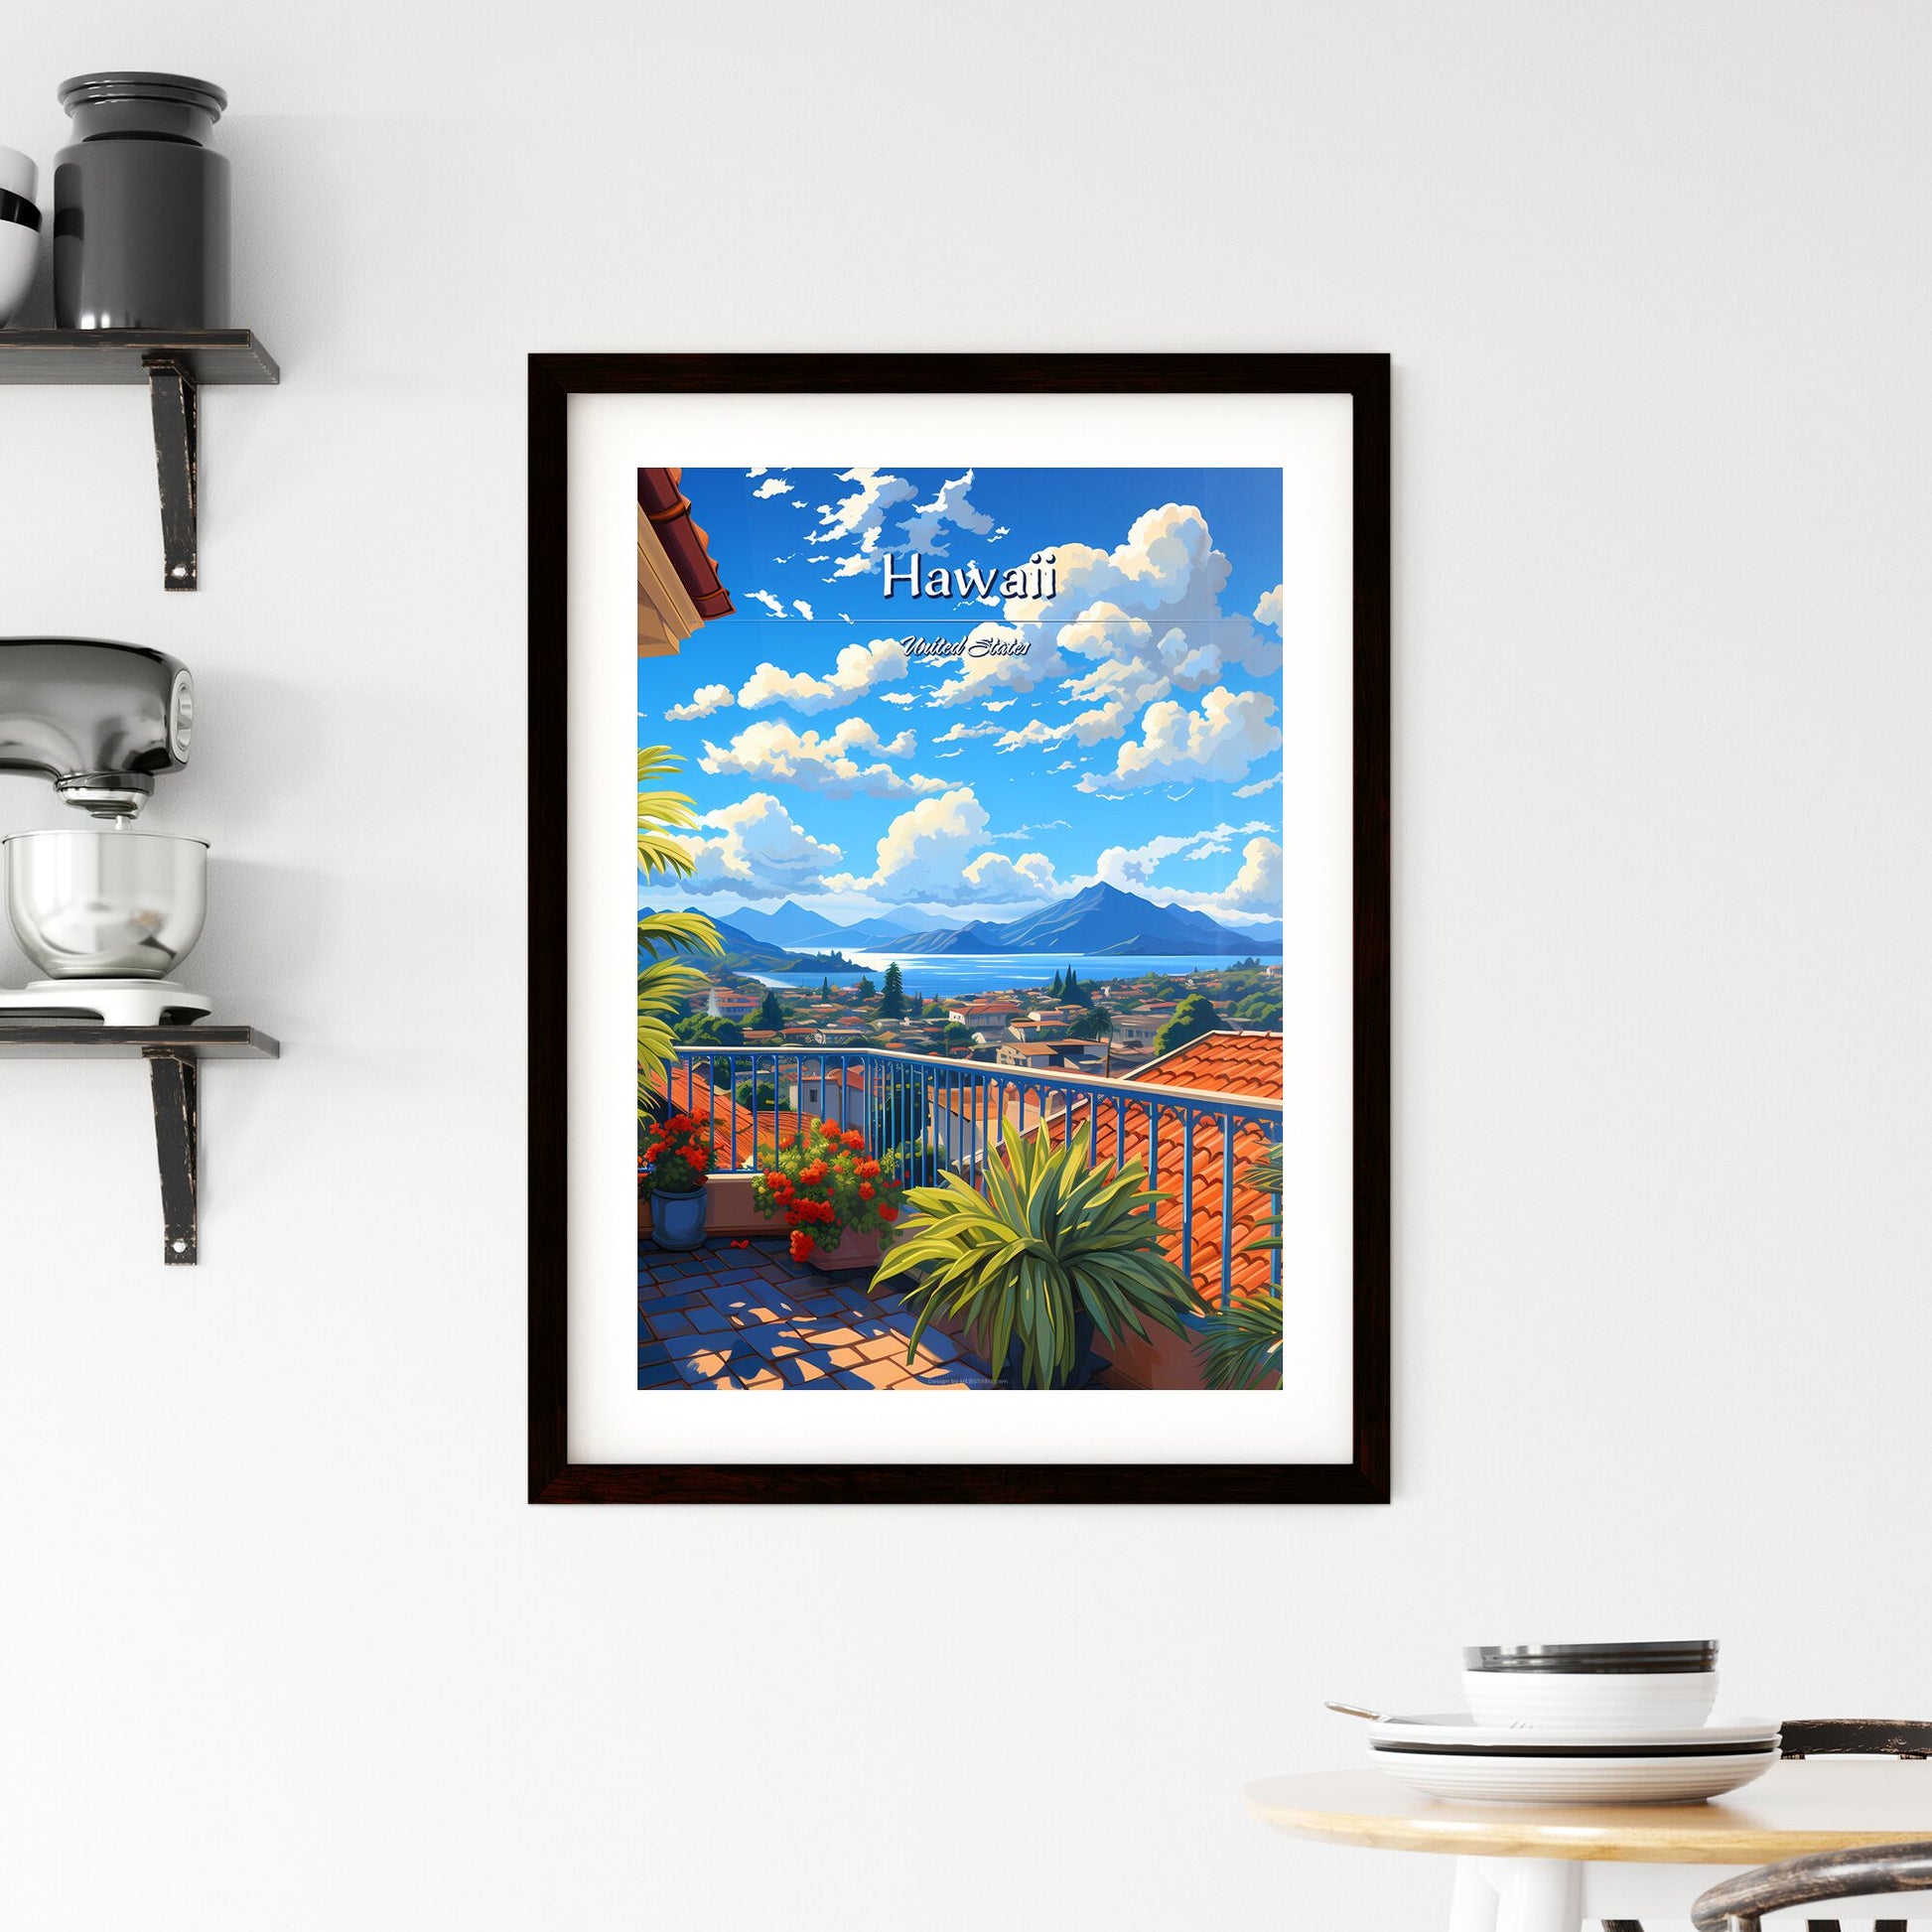 On the roofs of Hawaii, United States - Art print of a balcony with a view of a town and mountains Default Title